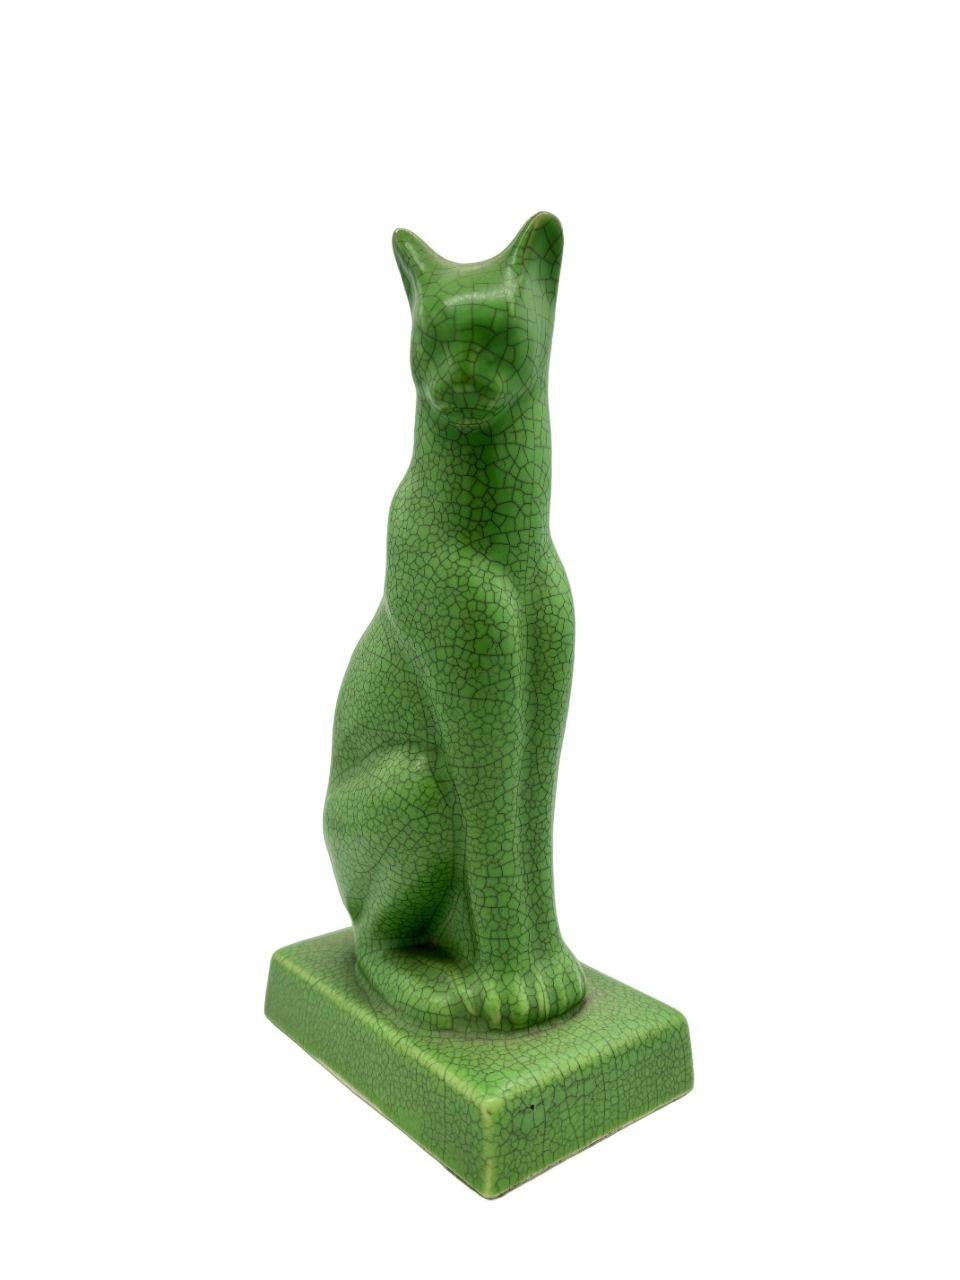 This 9-inch ceramic Bastet cat embodies the Post-War Egyptian Revival style, characterized by its sleek and stylized depiction of the ancient Egyptian feline deity. The cat, inspired by the revered goddess Bastet, exudes an aura of mystique and